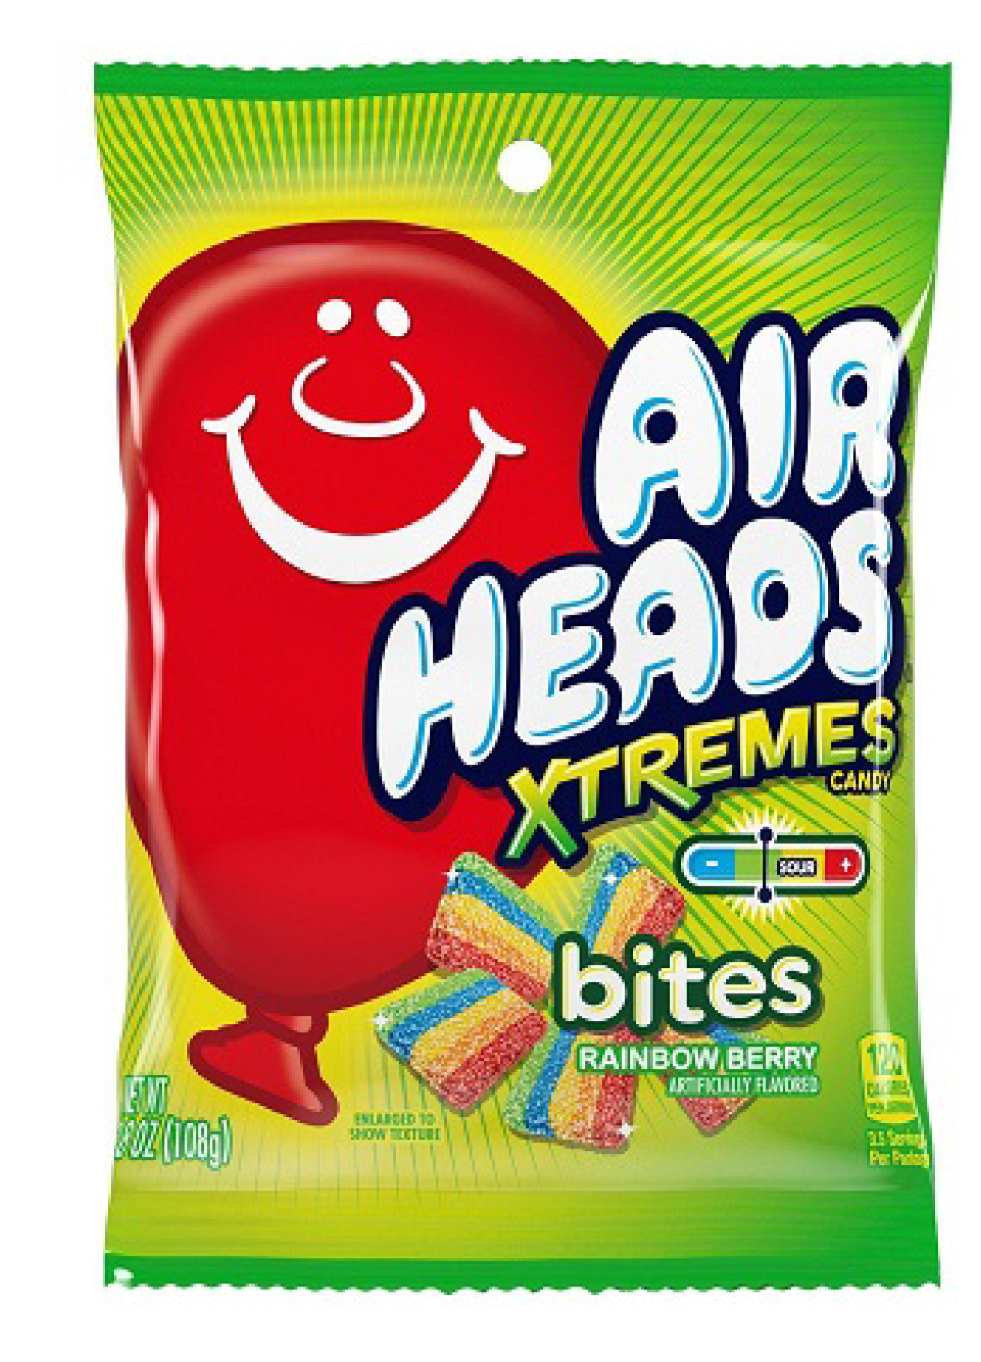  AirHeads Xtremes Rainbow Berry Bites 3.8 oz. Bag. For fresh candy and great service, visit www.allcitycandy.com